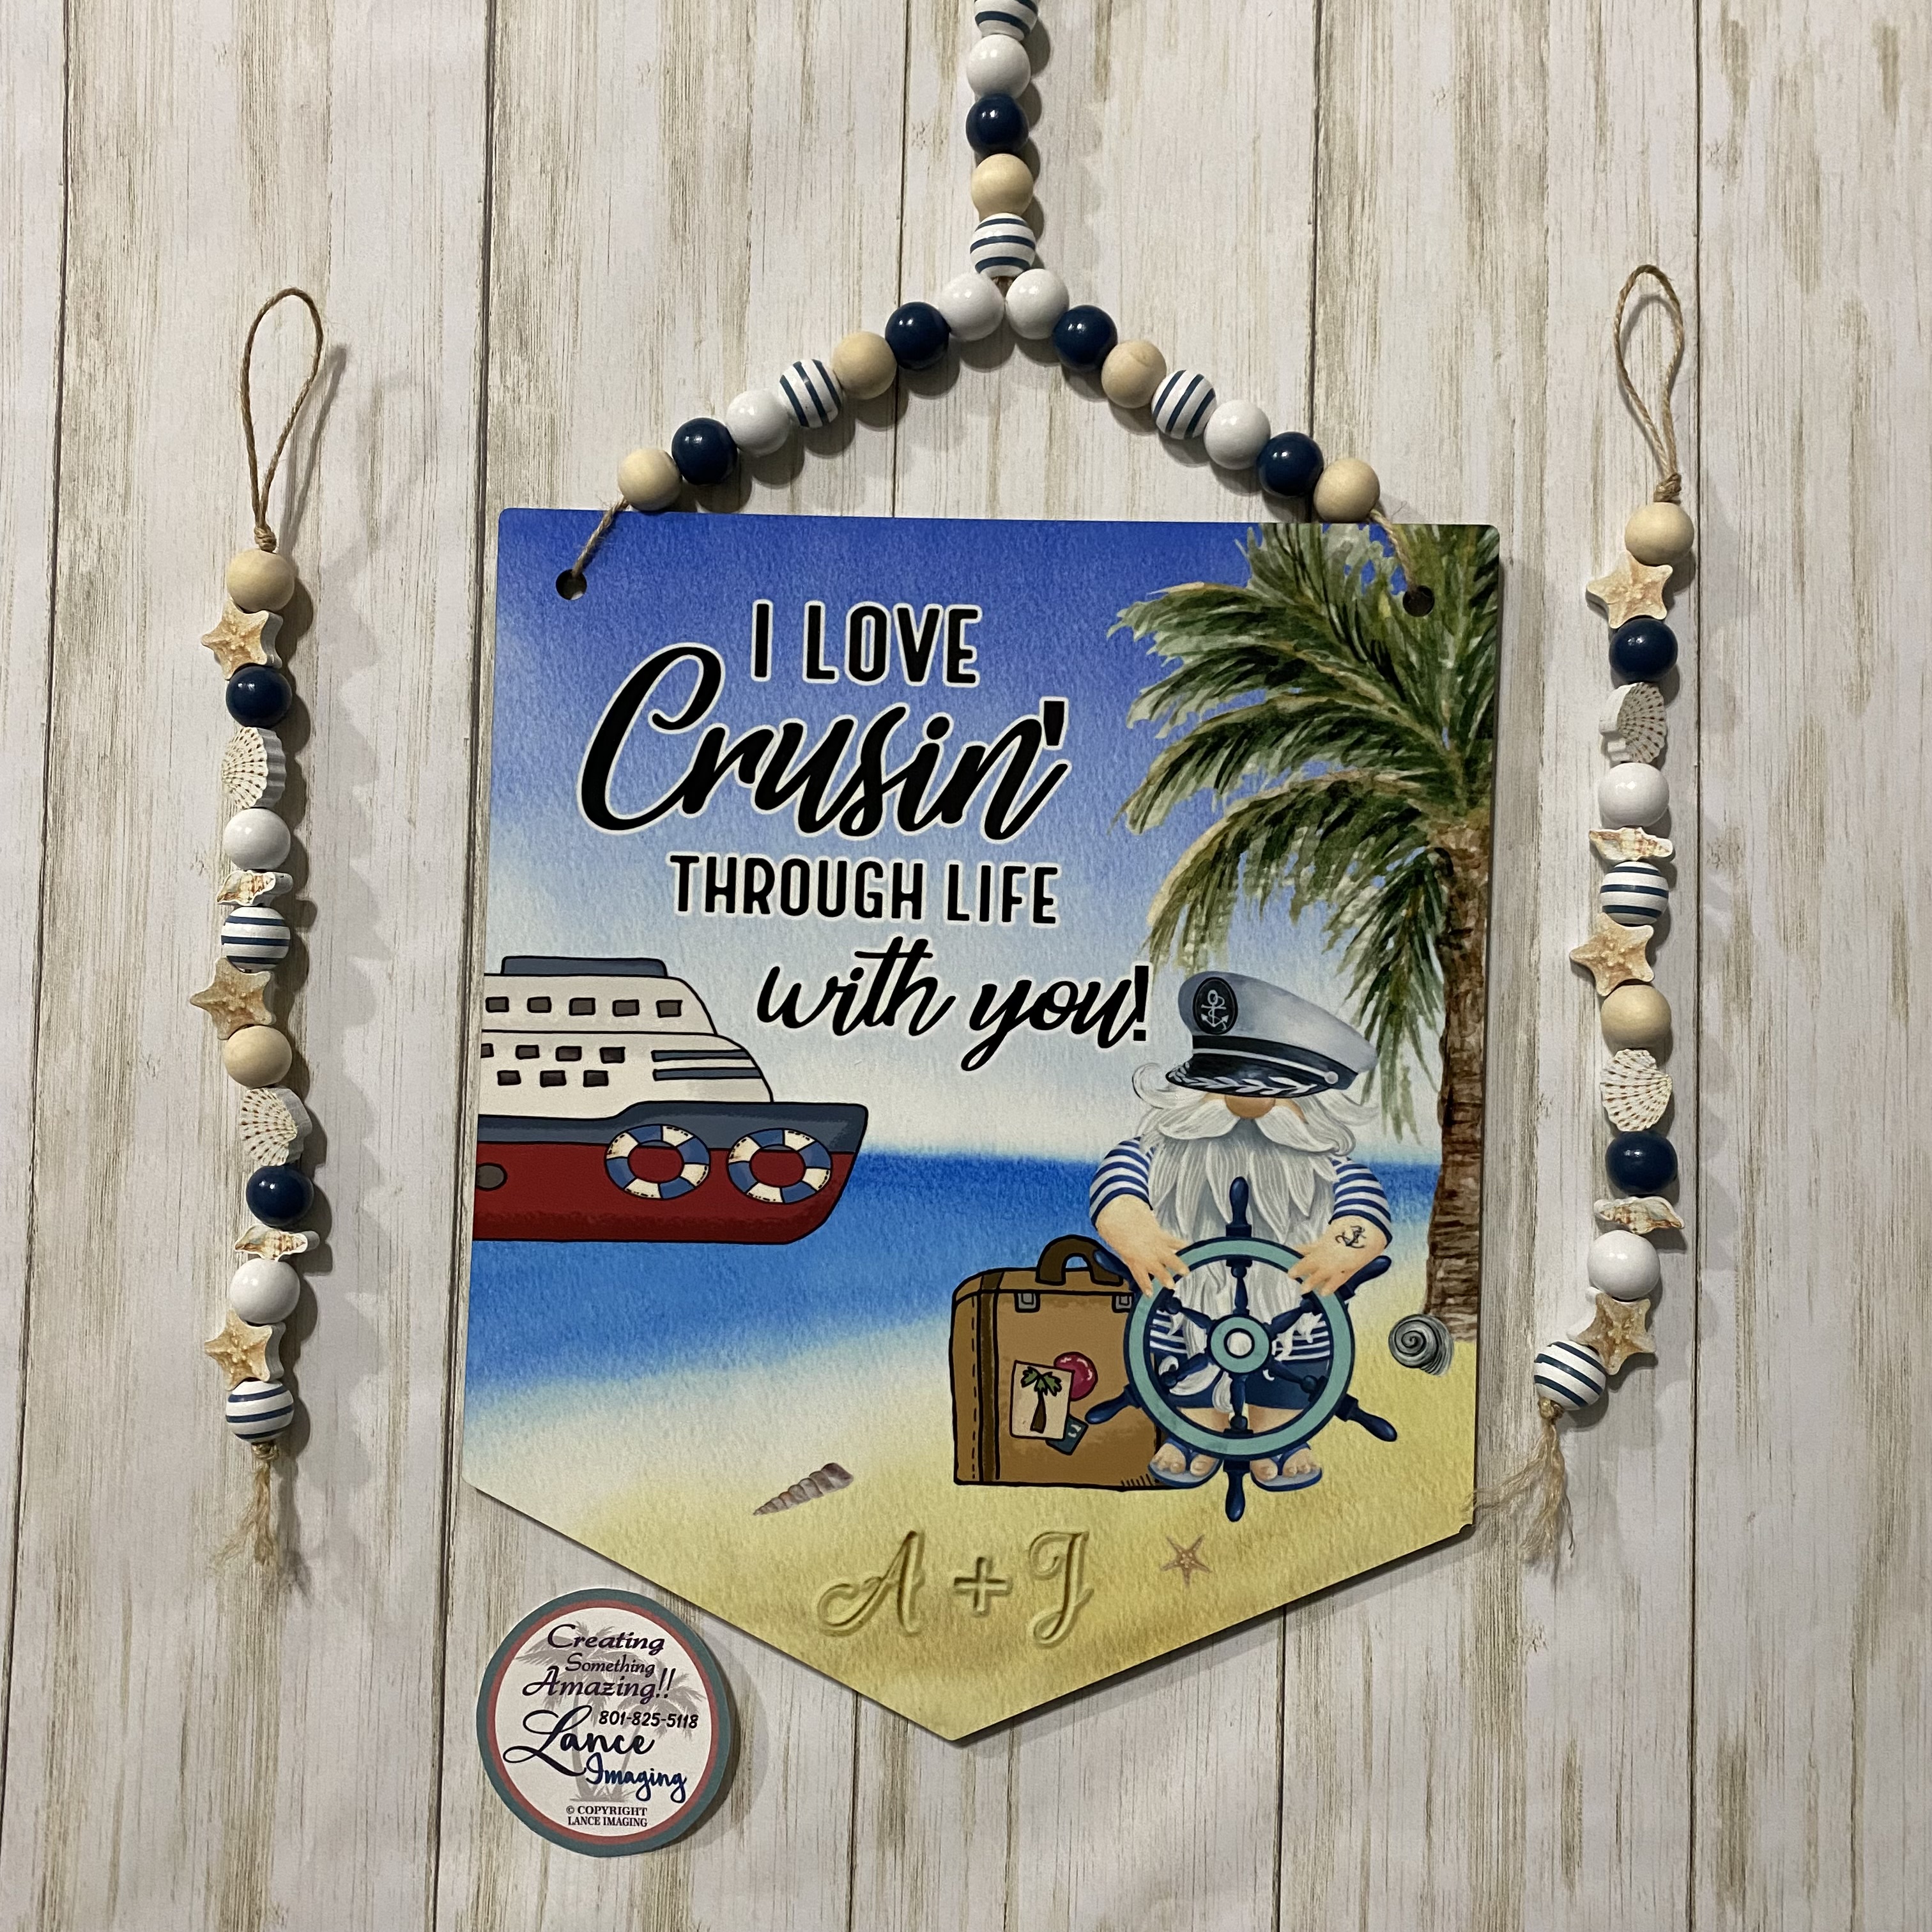 Cute cruise door sign with matching shell hangers